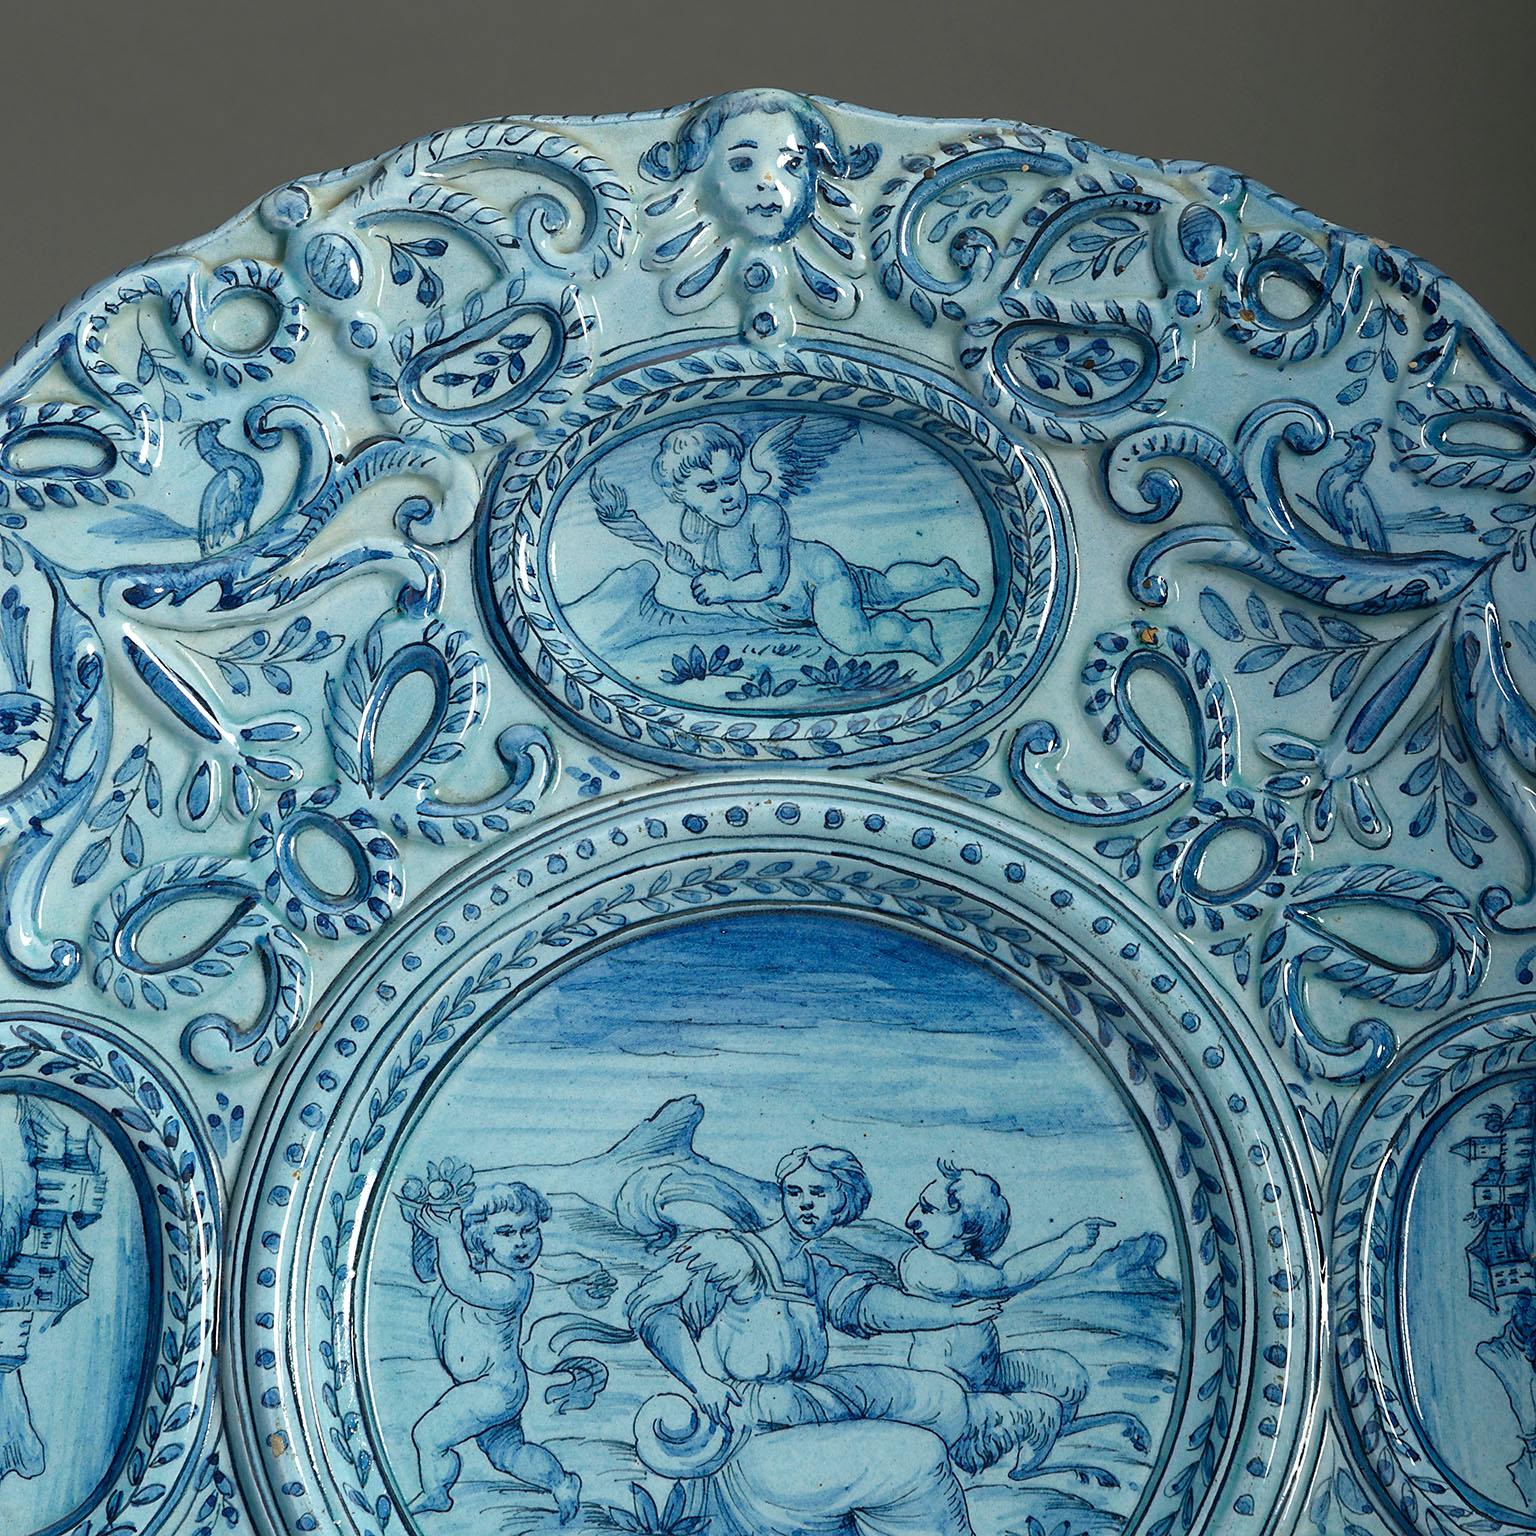 Renaissance Revival Large 19th Century Blue and White Maiolica Charger